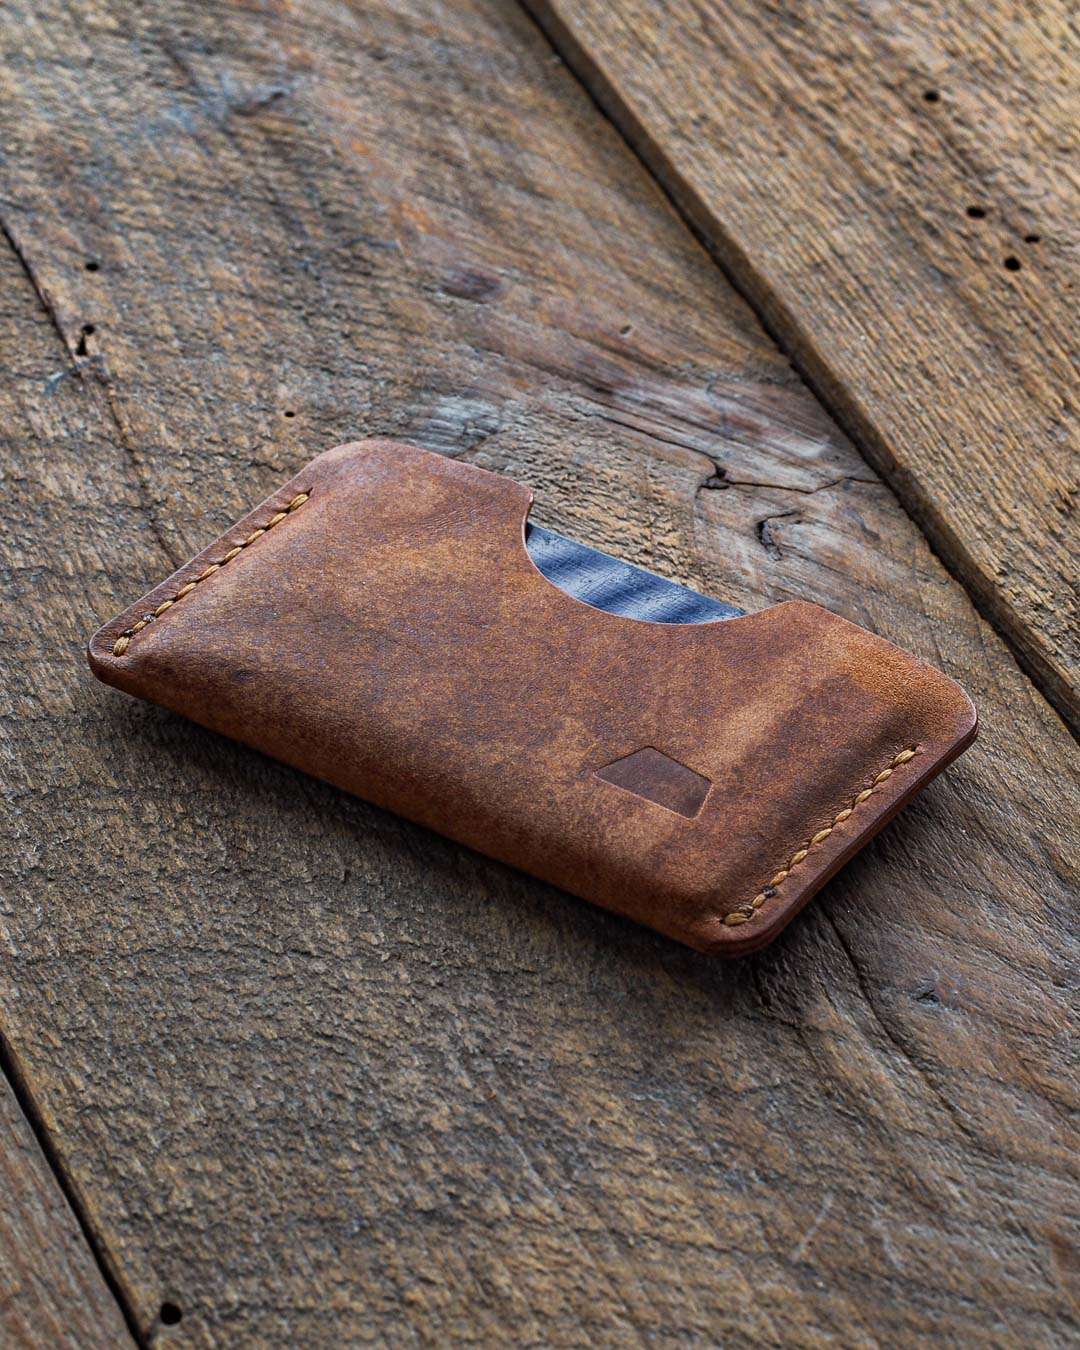 Luava handmade leather wallet handcrafted leatherwallet cardholder card holder cardwallet vegetable tanned absolute back in use angle